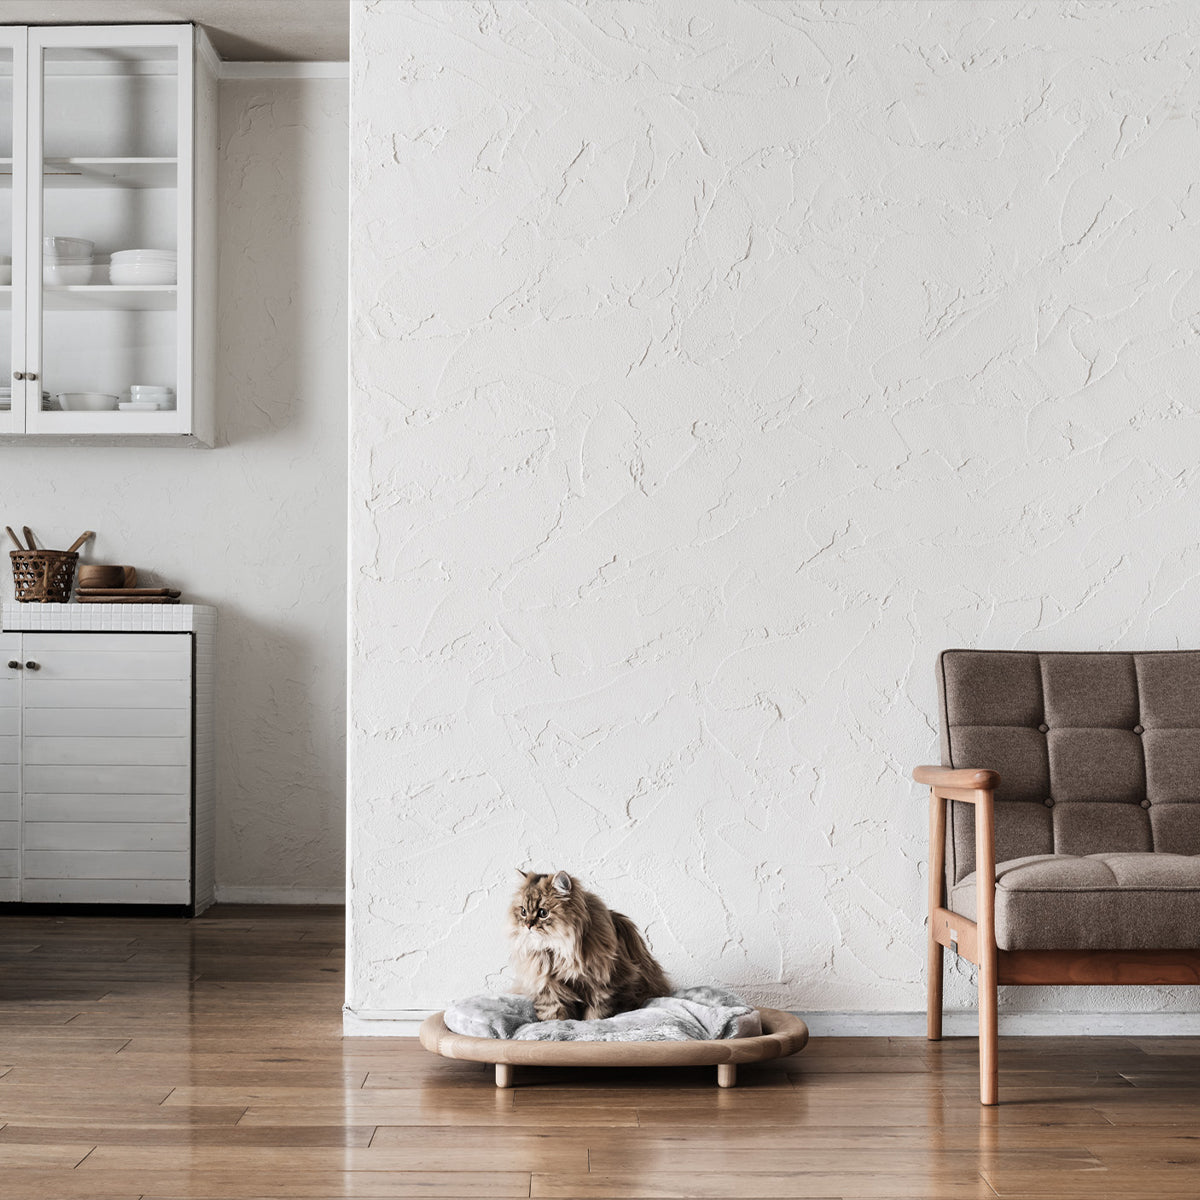 Karimoku Cat Luxury Cat Bed, Carved From Solid Wood | at Made Moggie